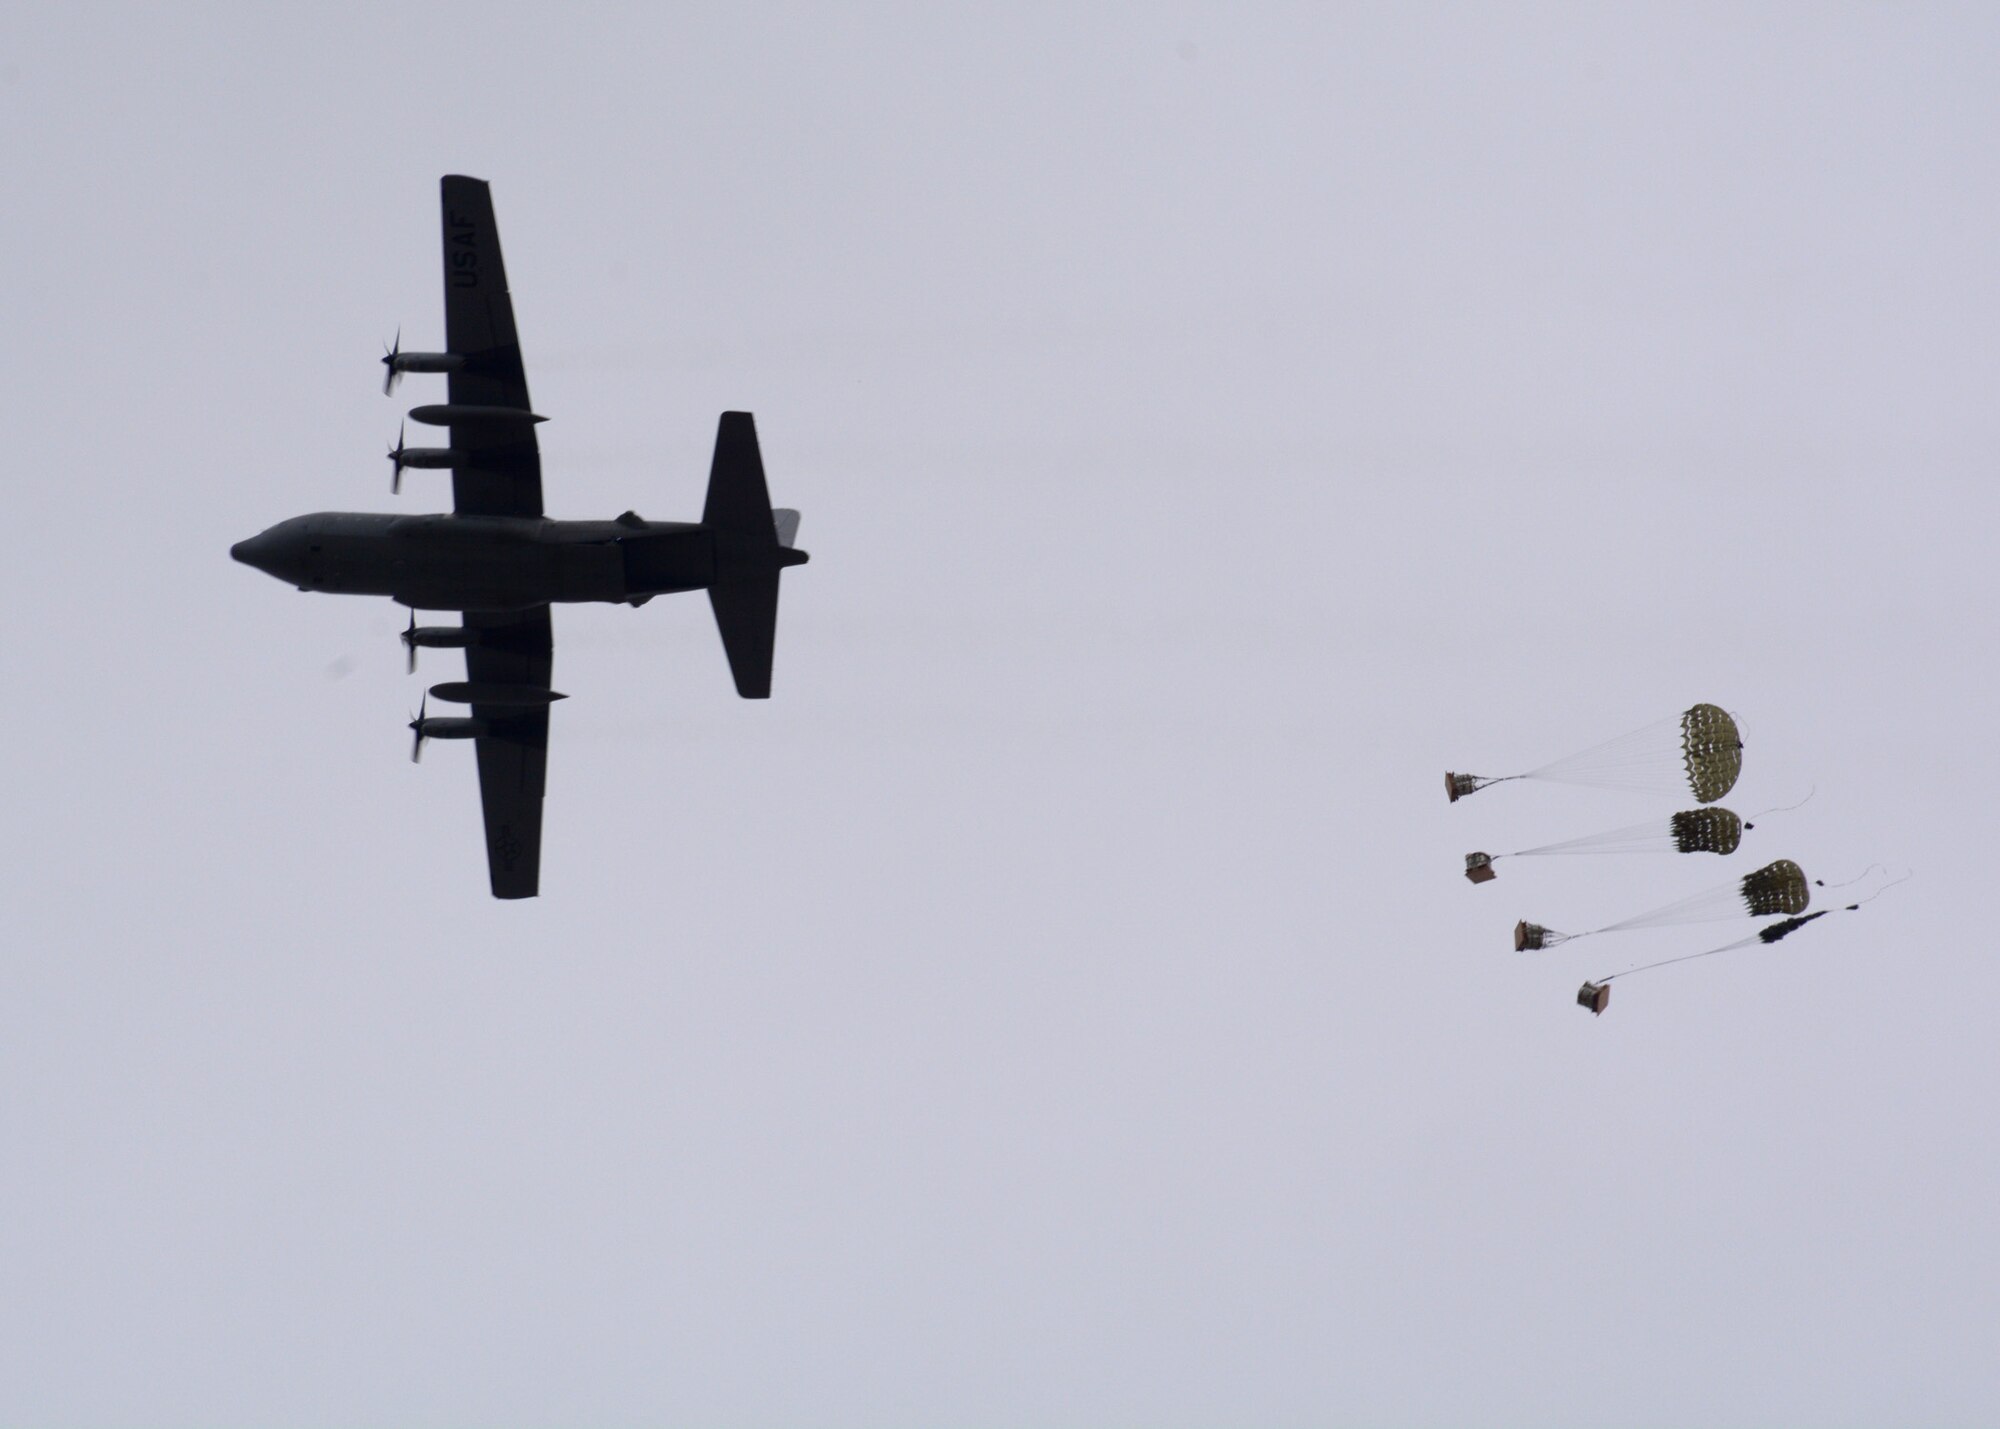 Parachuted training cargo falls to the ground after being dropped from a C-130 Hercules transport aircraft assigned to the 120th Airlift Wing of the Montana Air National Guard Aug. 12, 2015. The aircraft was taking part in an exercise dropping cargo at the Spearhead Drop Zone located west of Toston, Mont. (U.S. Air National Guard photo/Senior Master Sgt. Eric Peterson)

